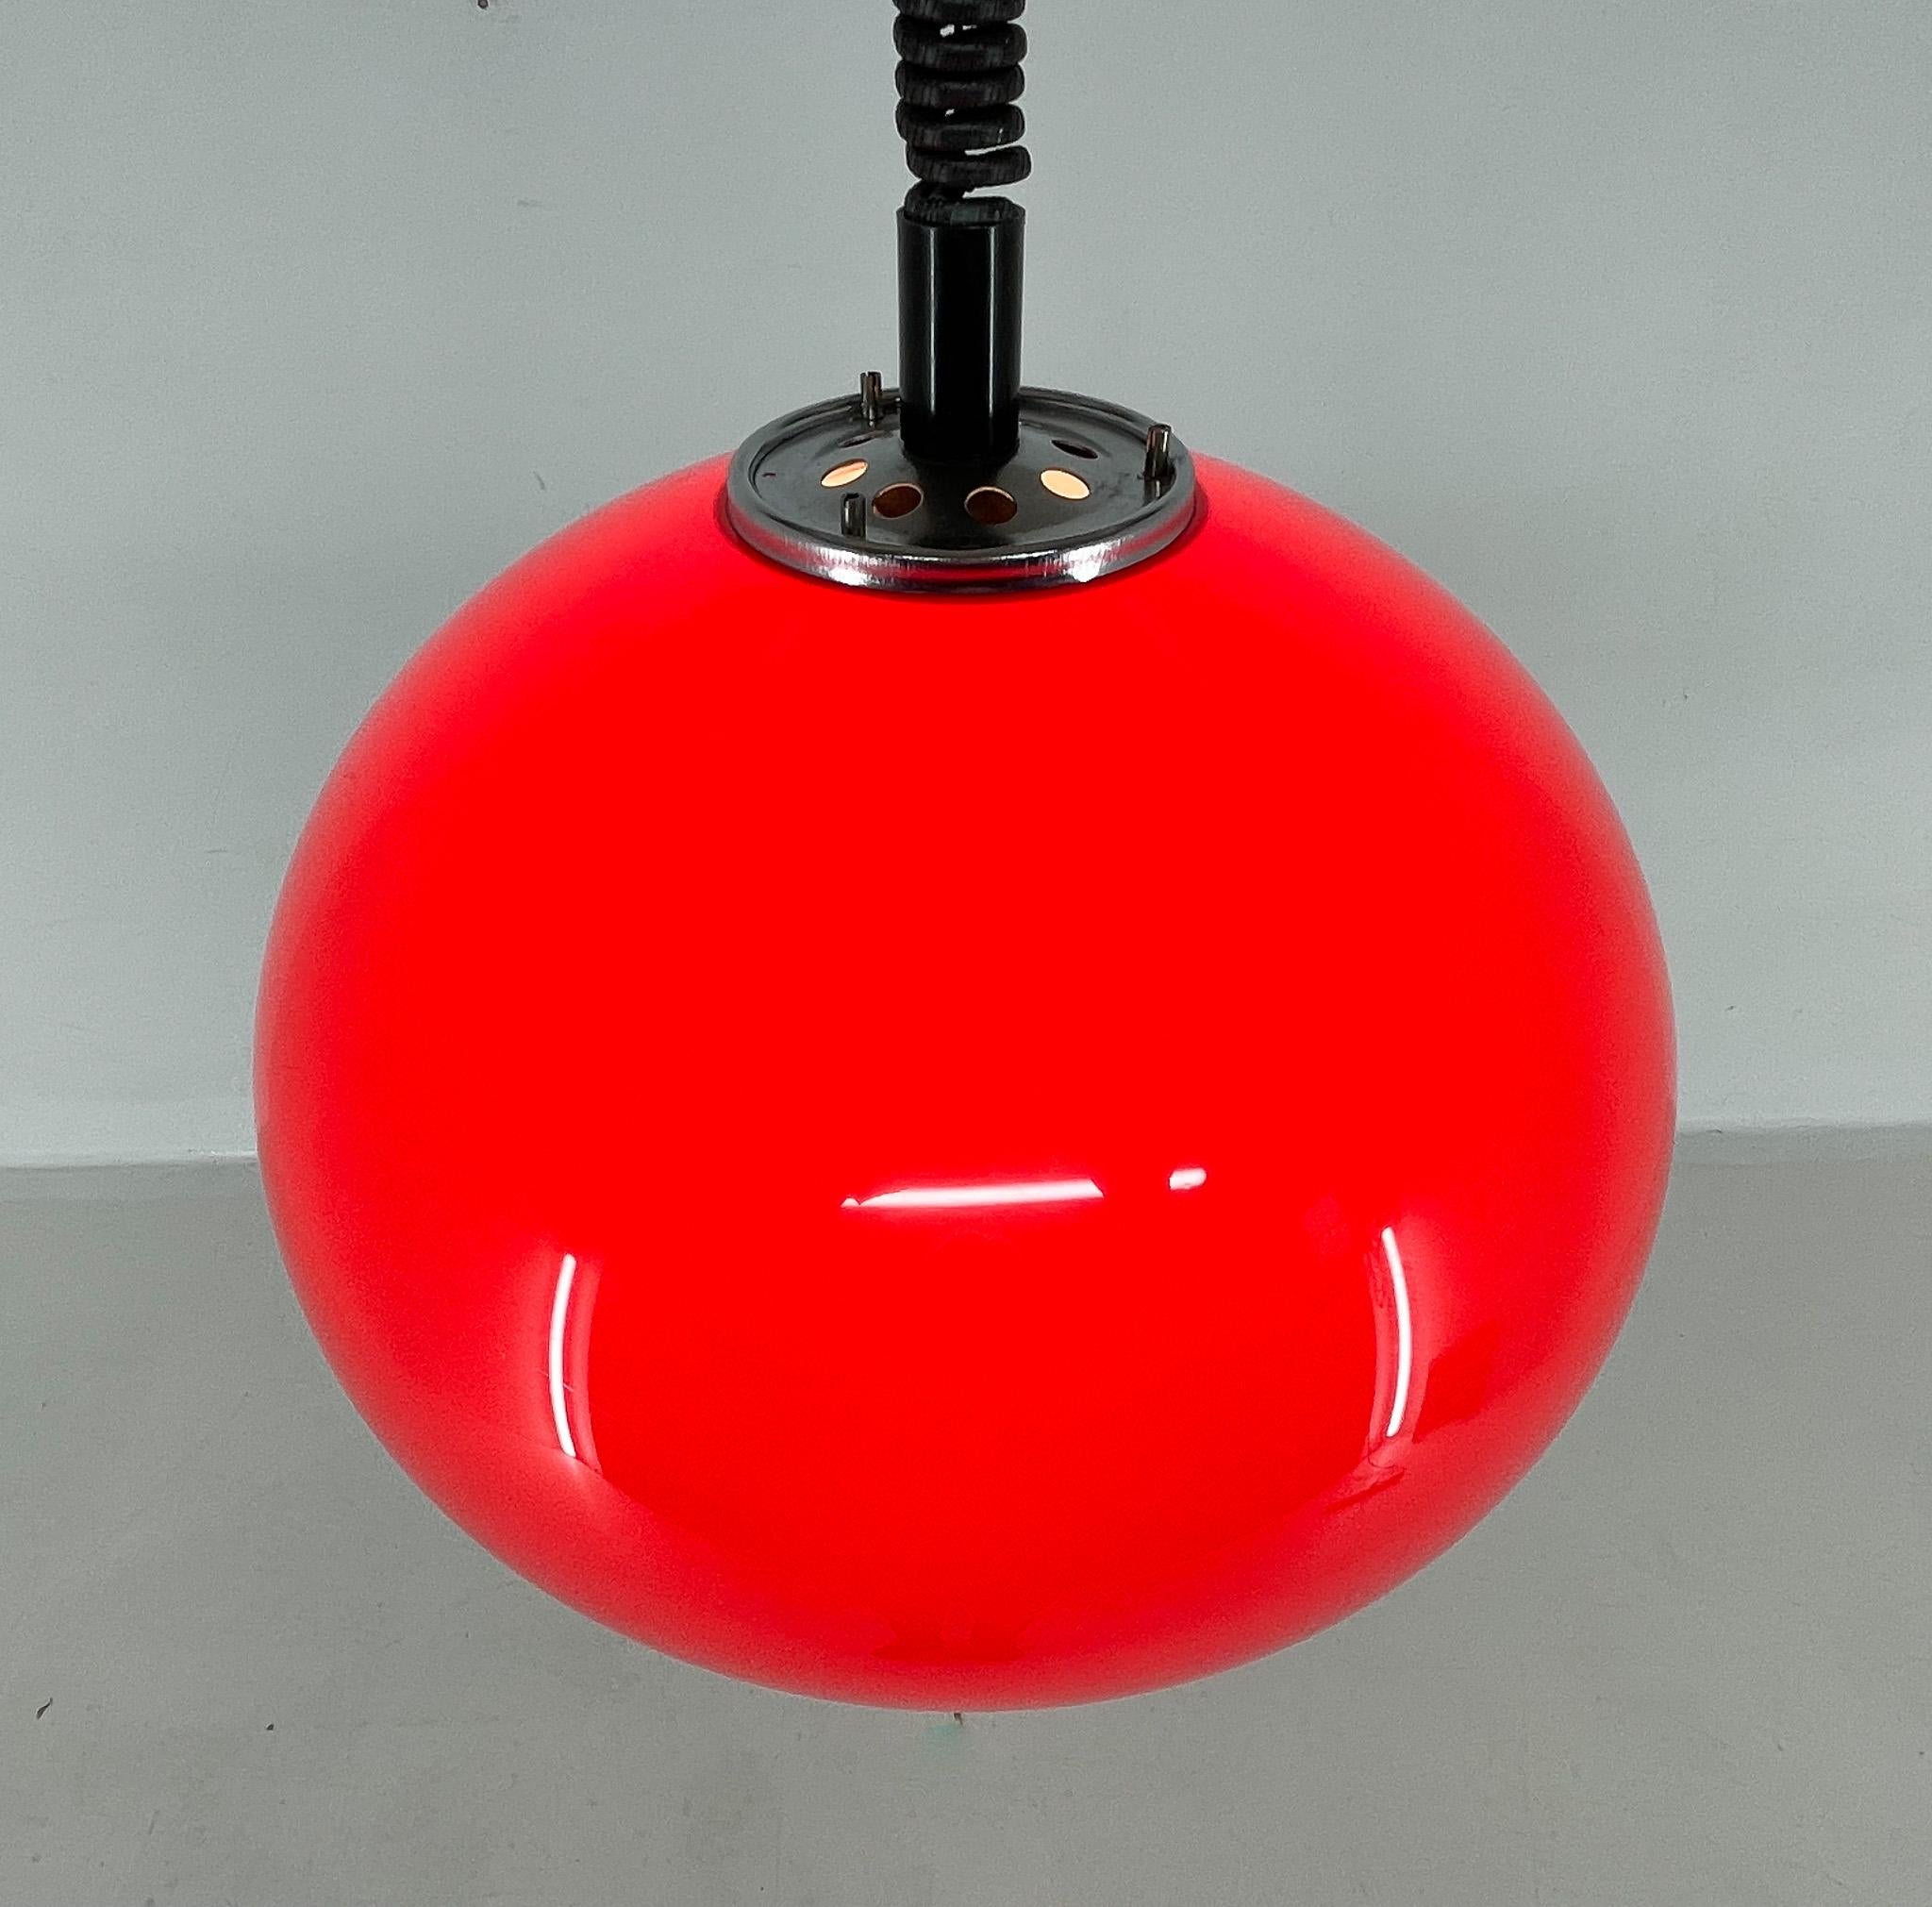 Midcentury Red Pendant with Chrome by Harvey Guzzini for Meblo, Italy For Sale 1